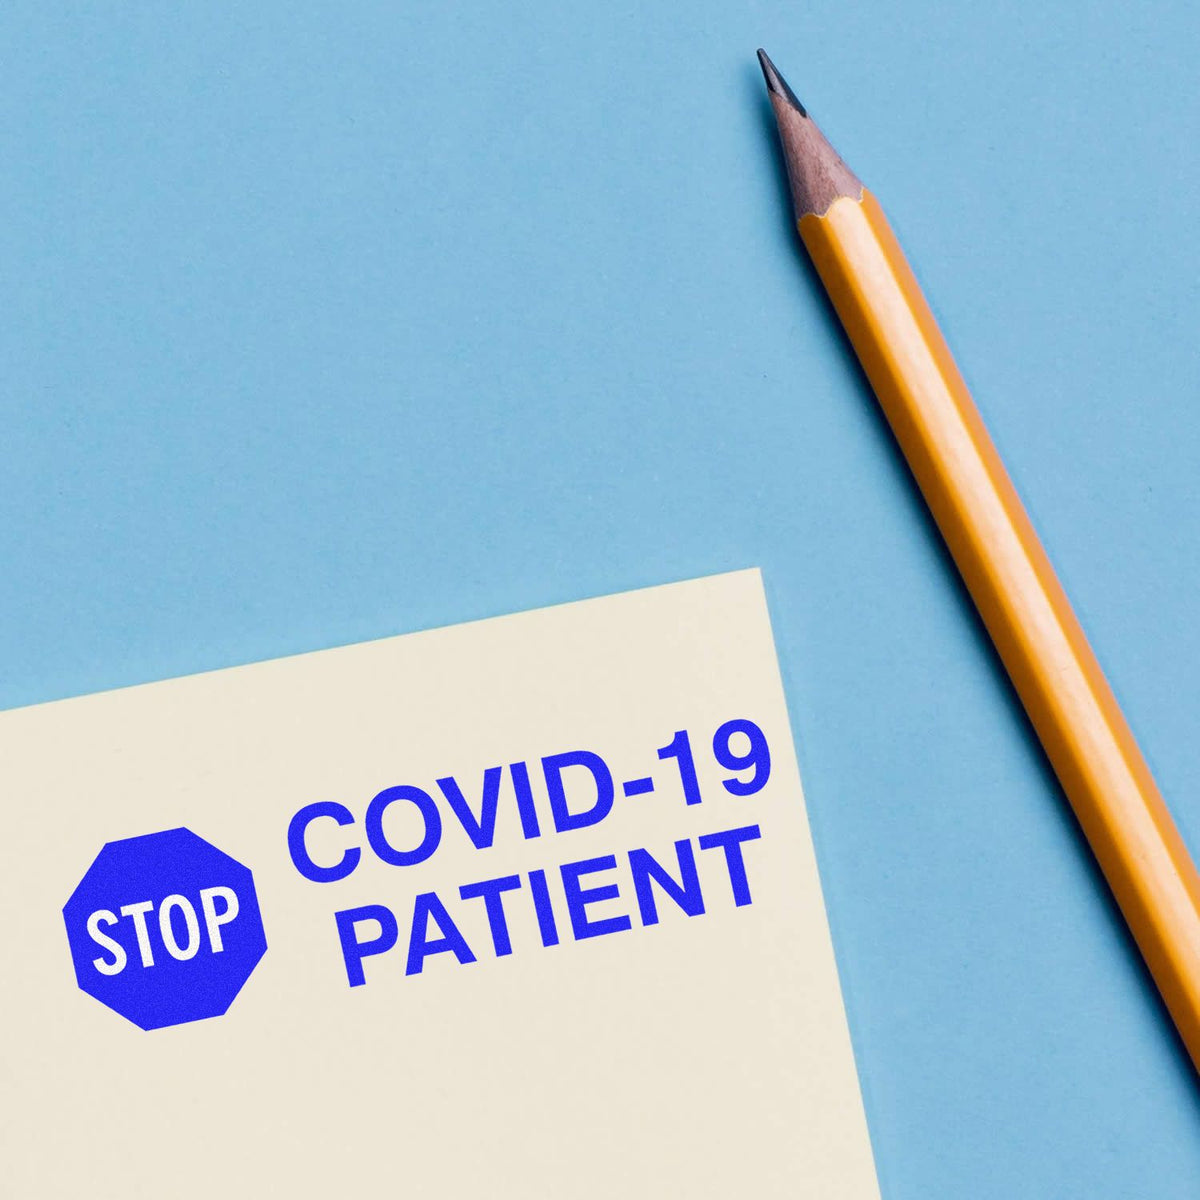 Large Self-Inking Stop Covid Patient Stamp In Use Photo